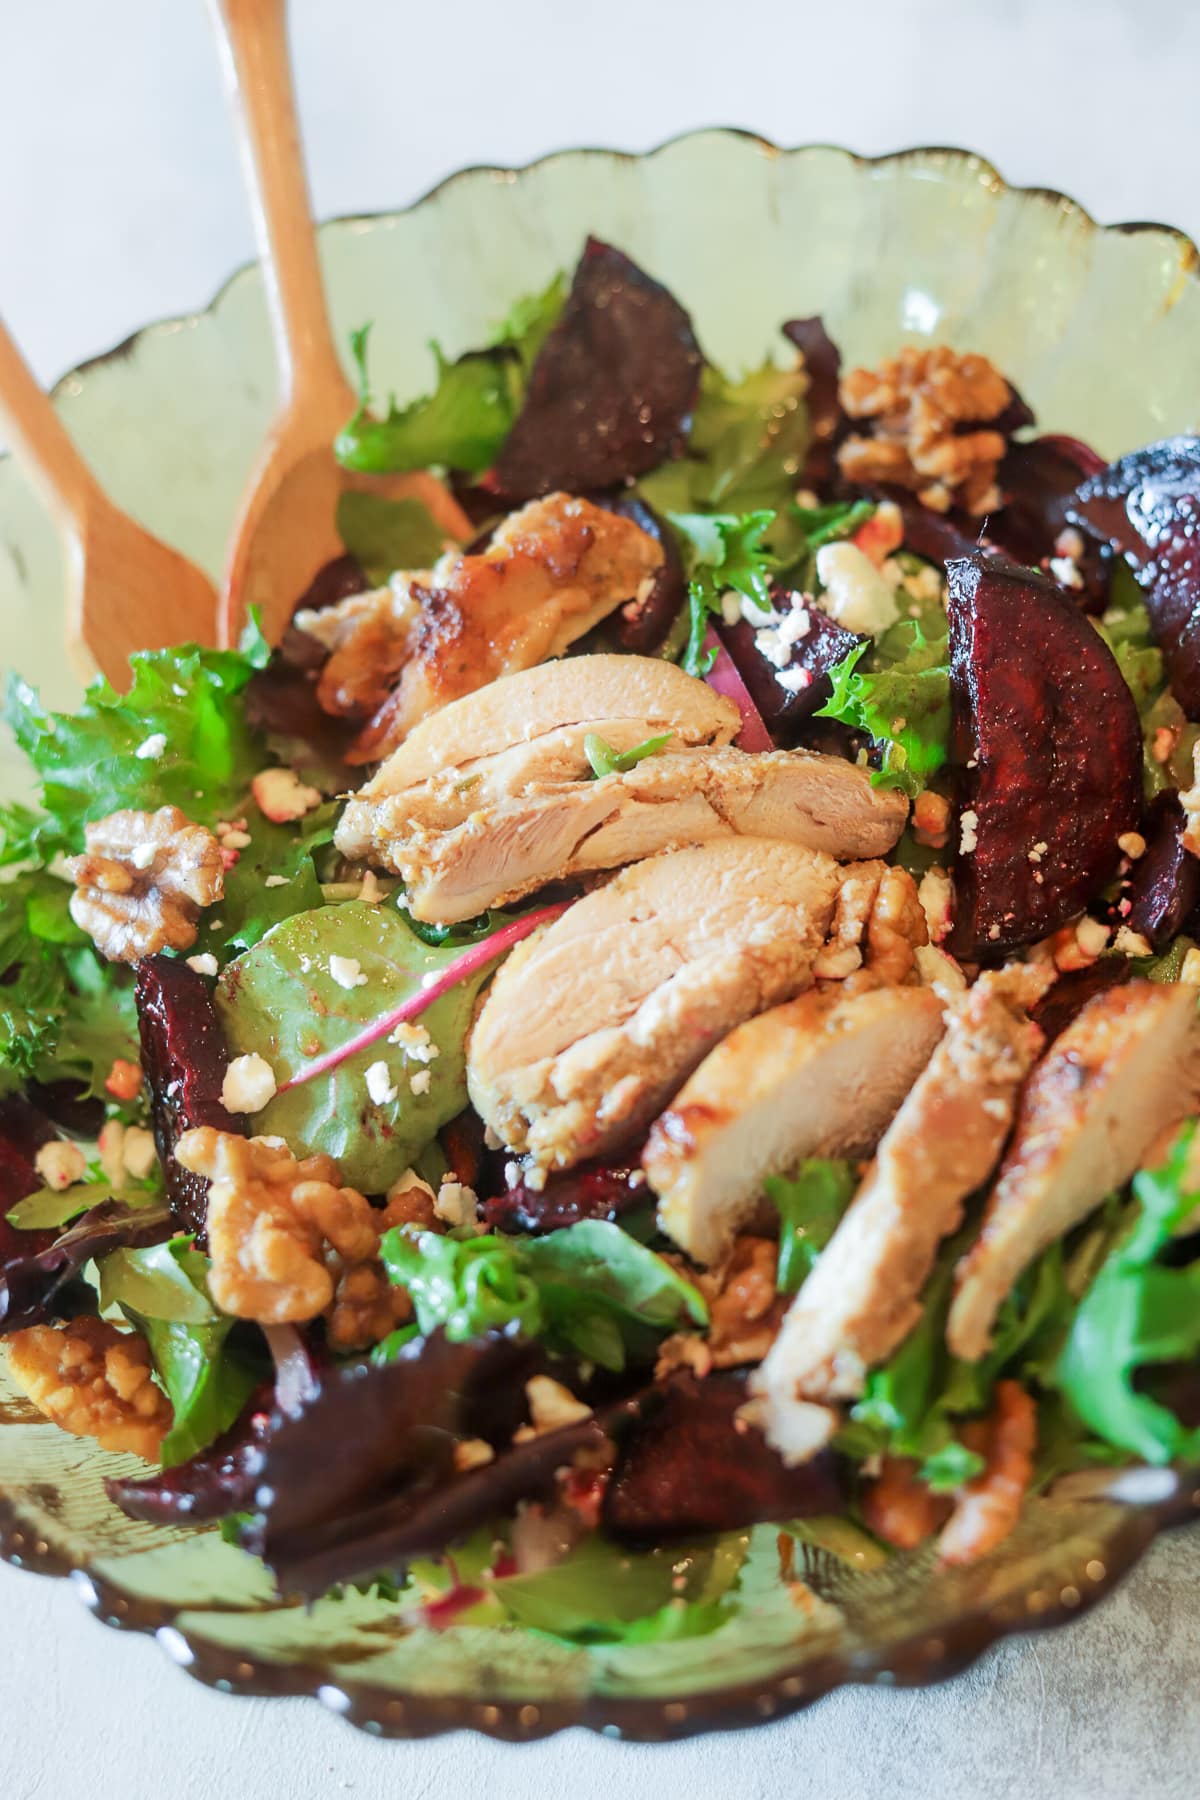 beetroot salad with sliced chicken onto